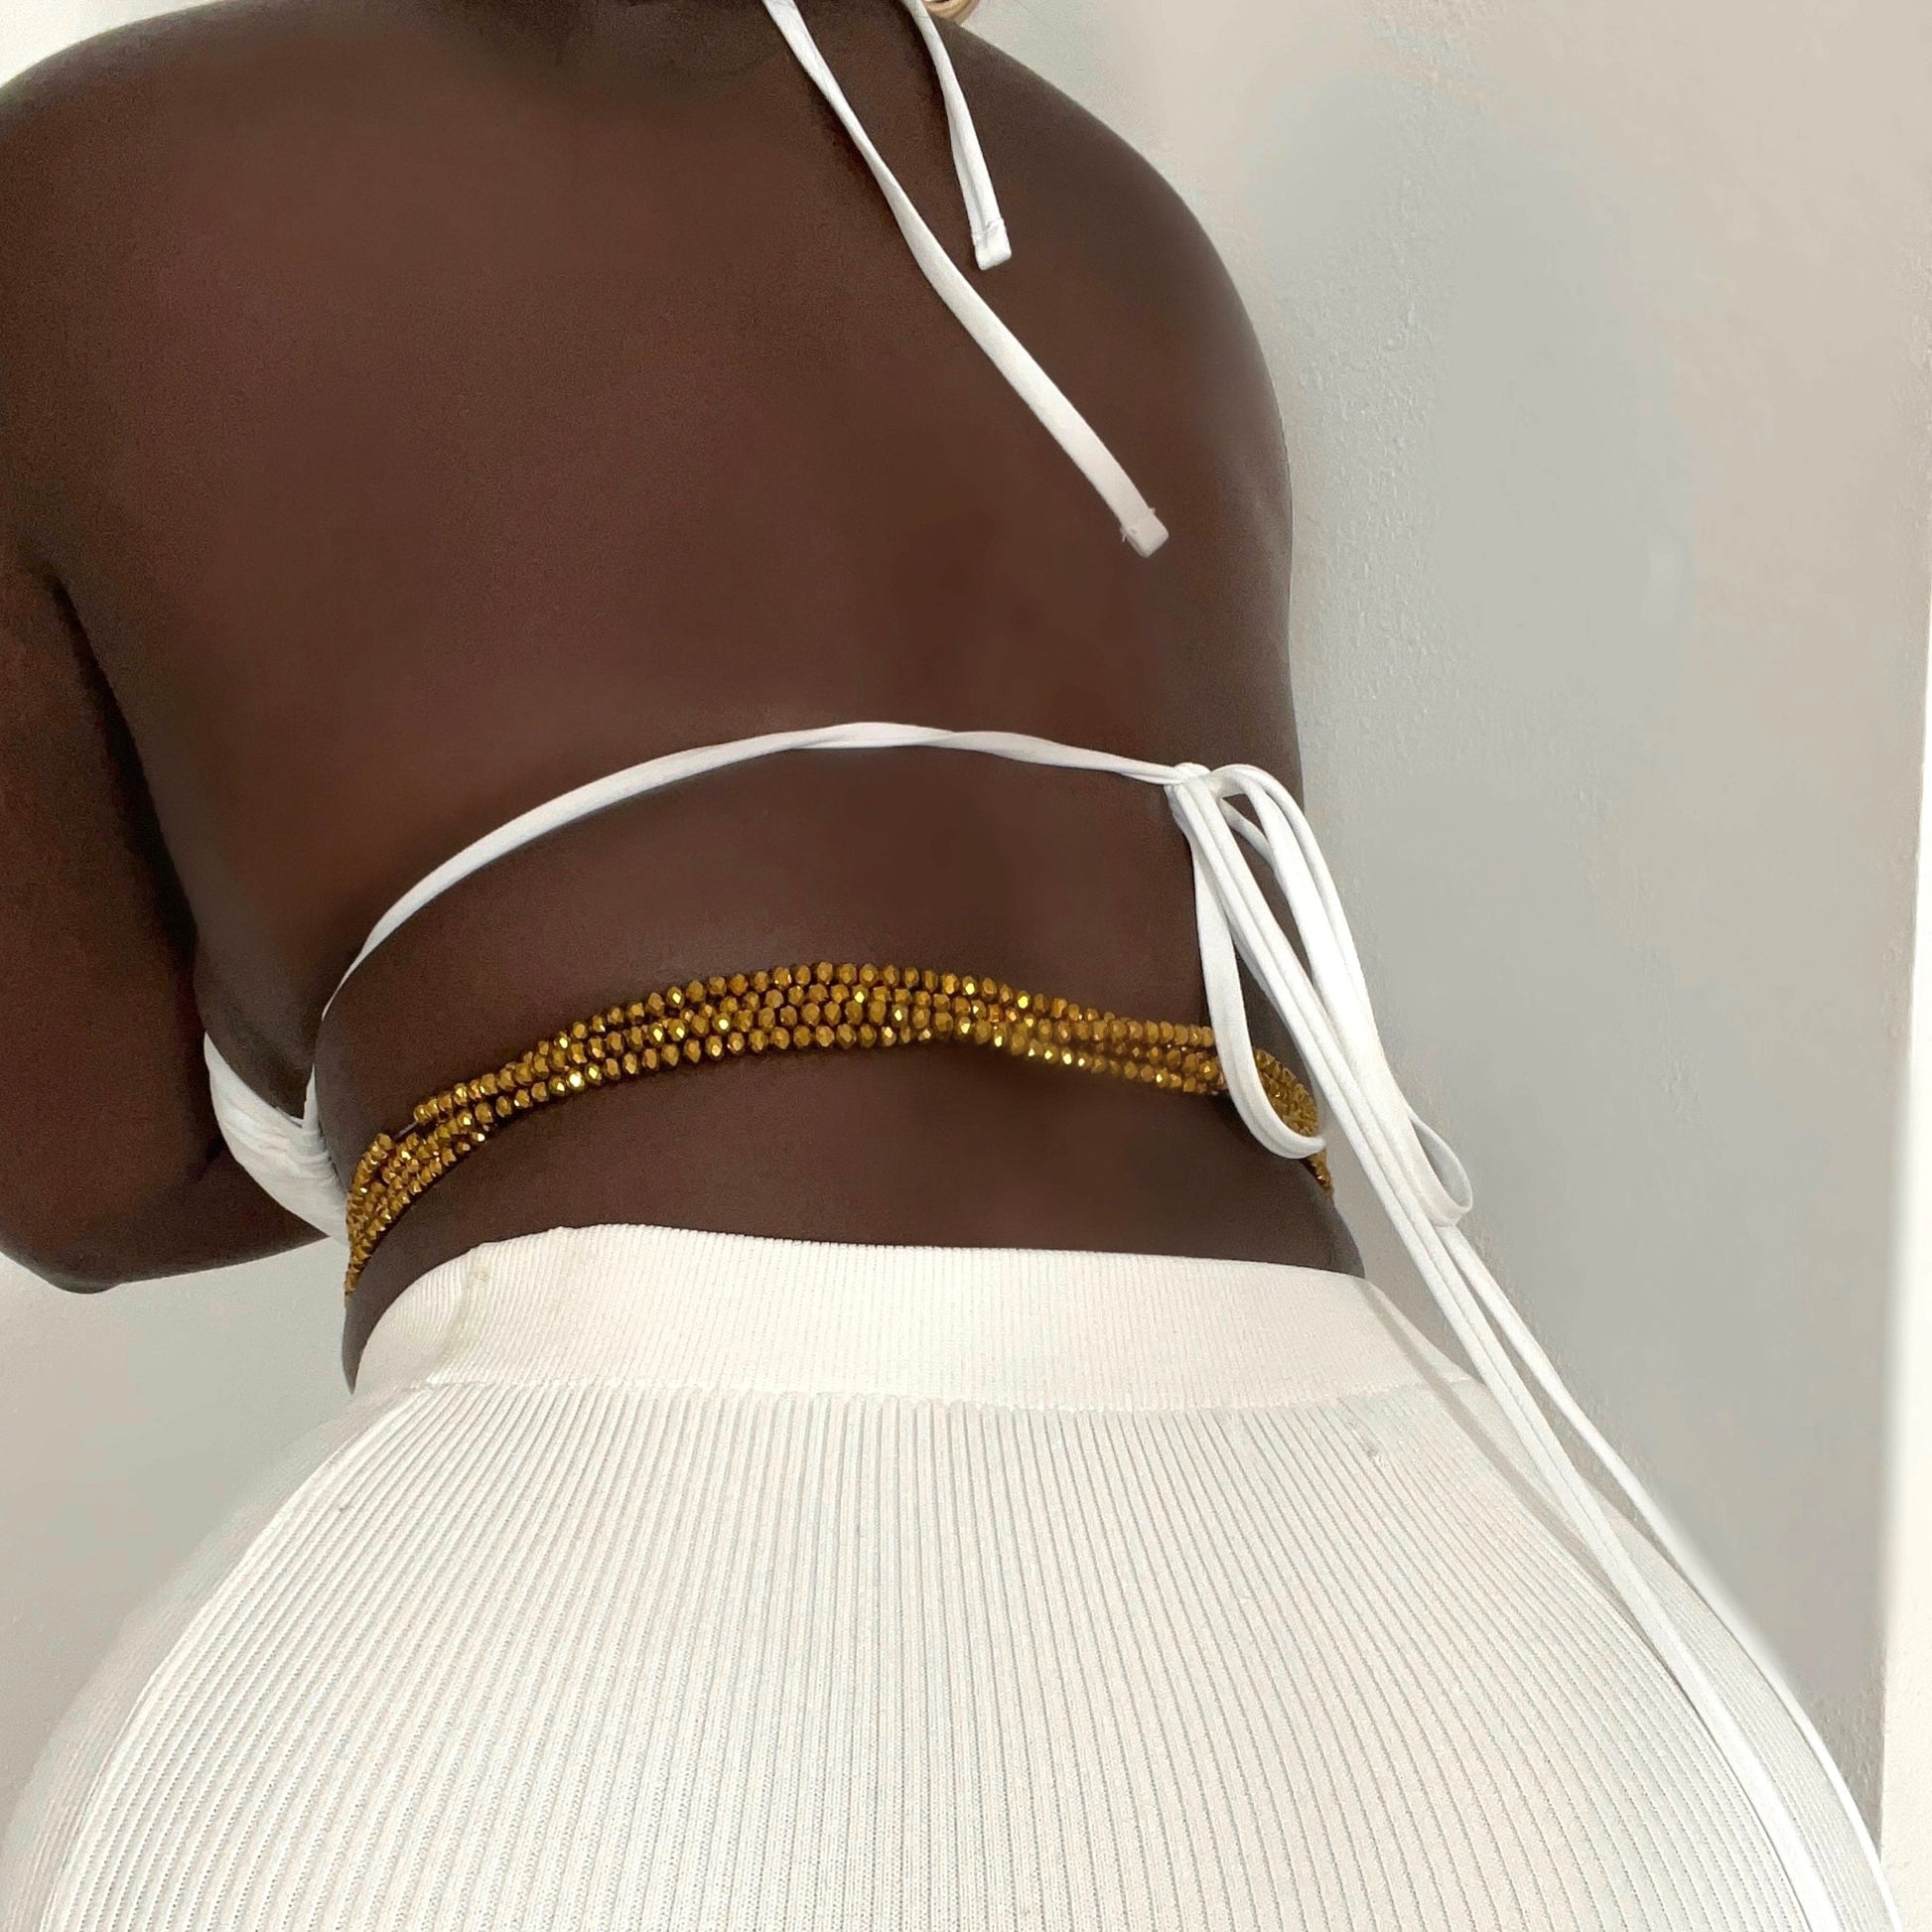 Muti Colored Gold Waist Bead – A Milli Little Things